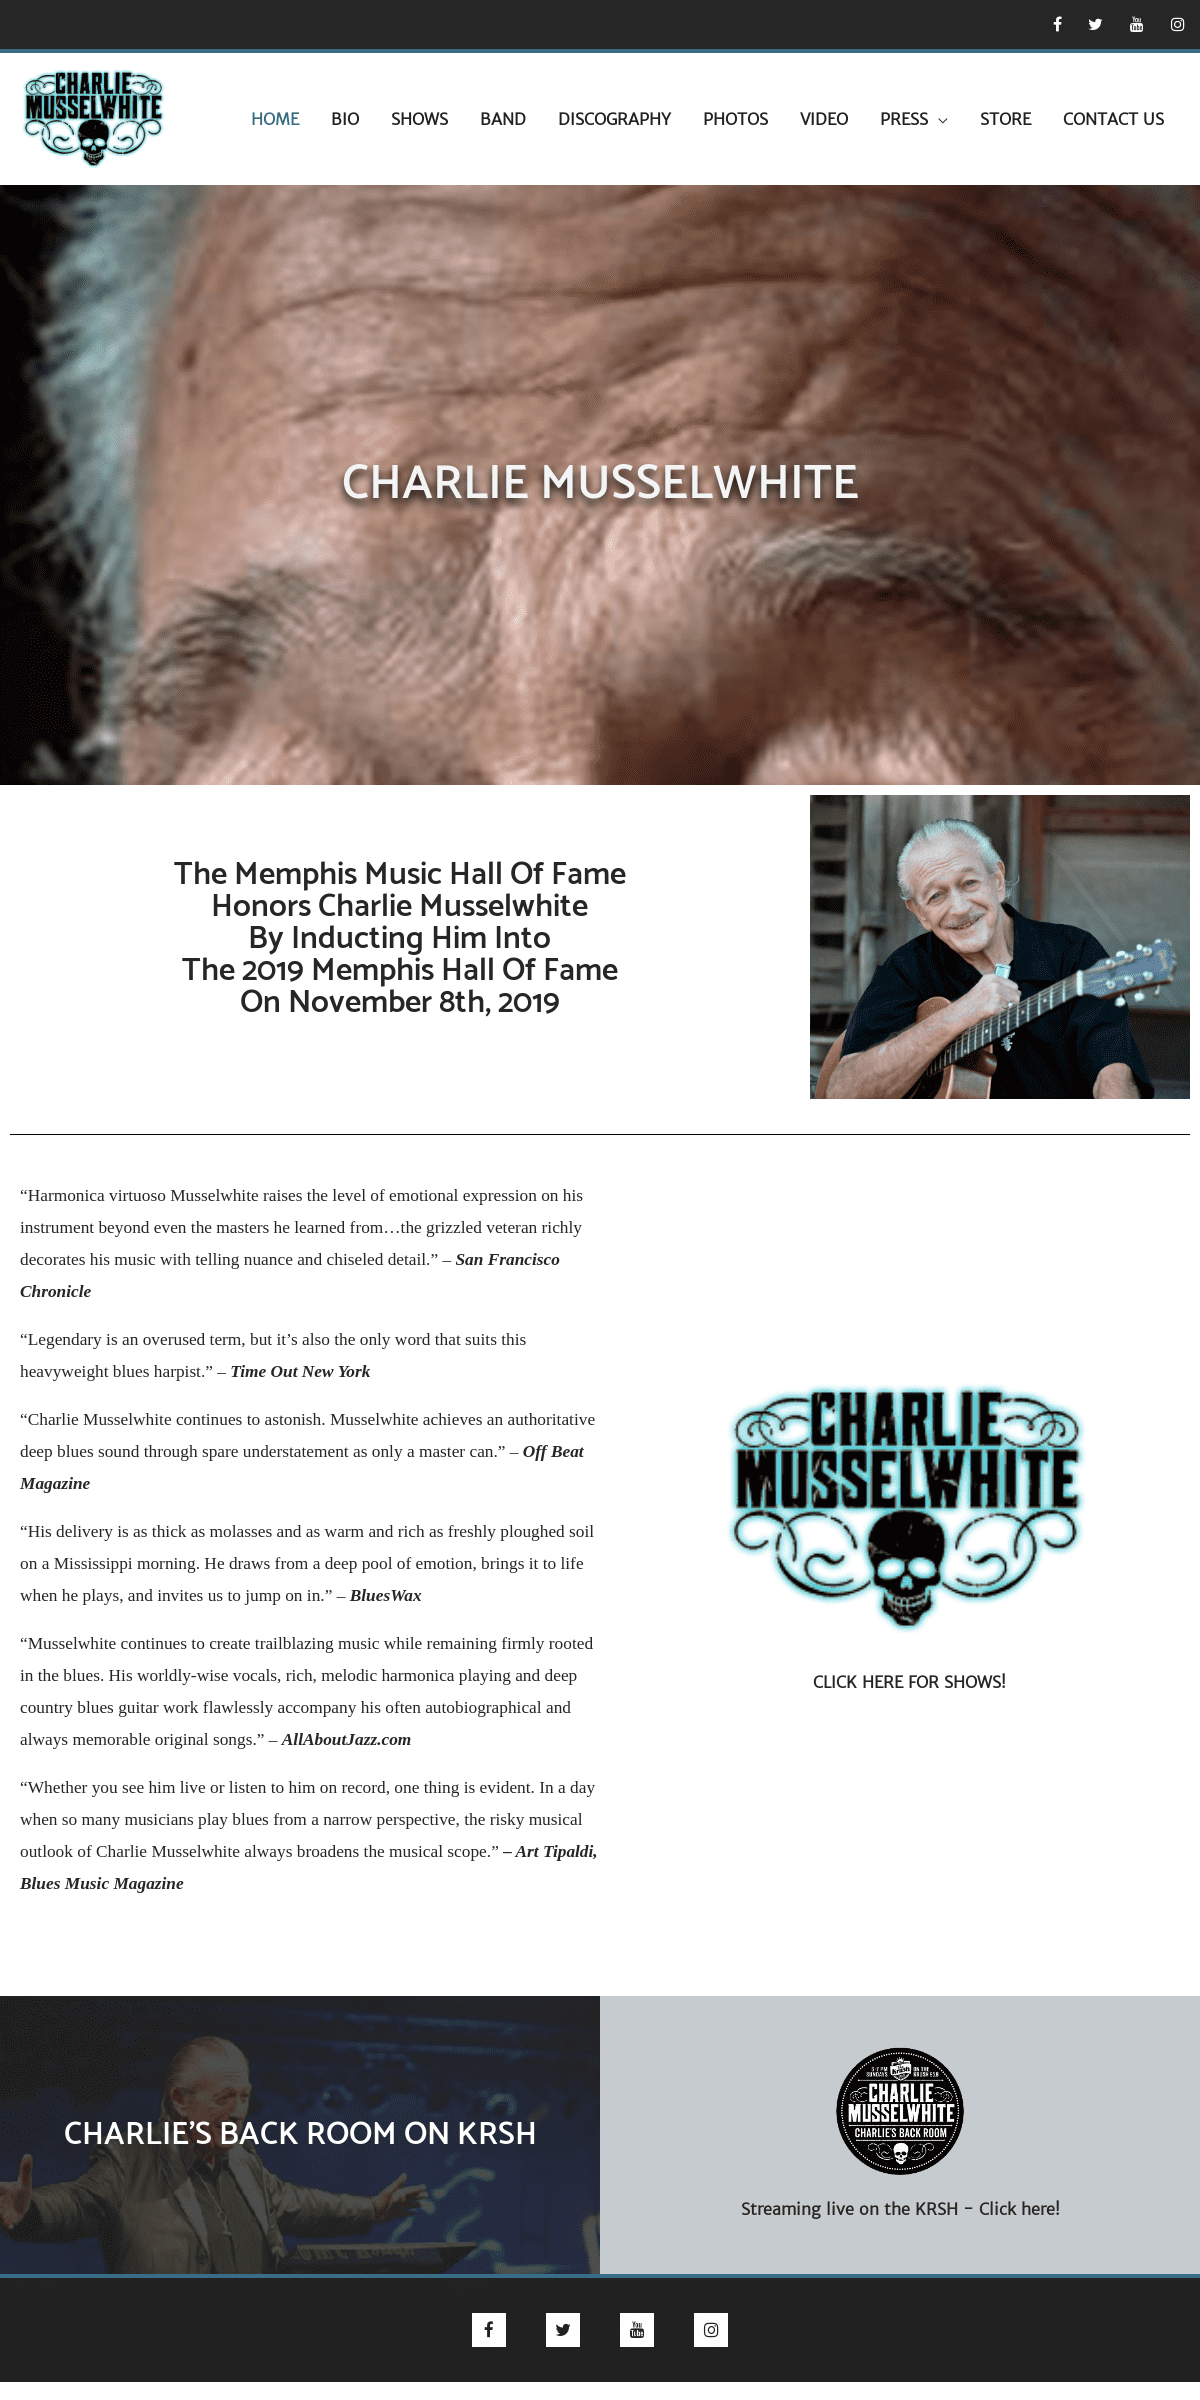 A complete backup of charliemusselwhite.com